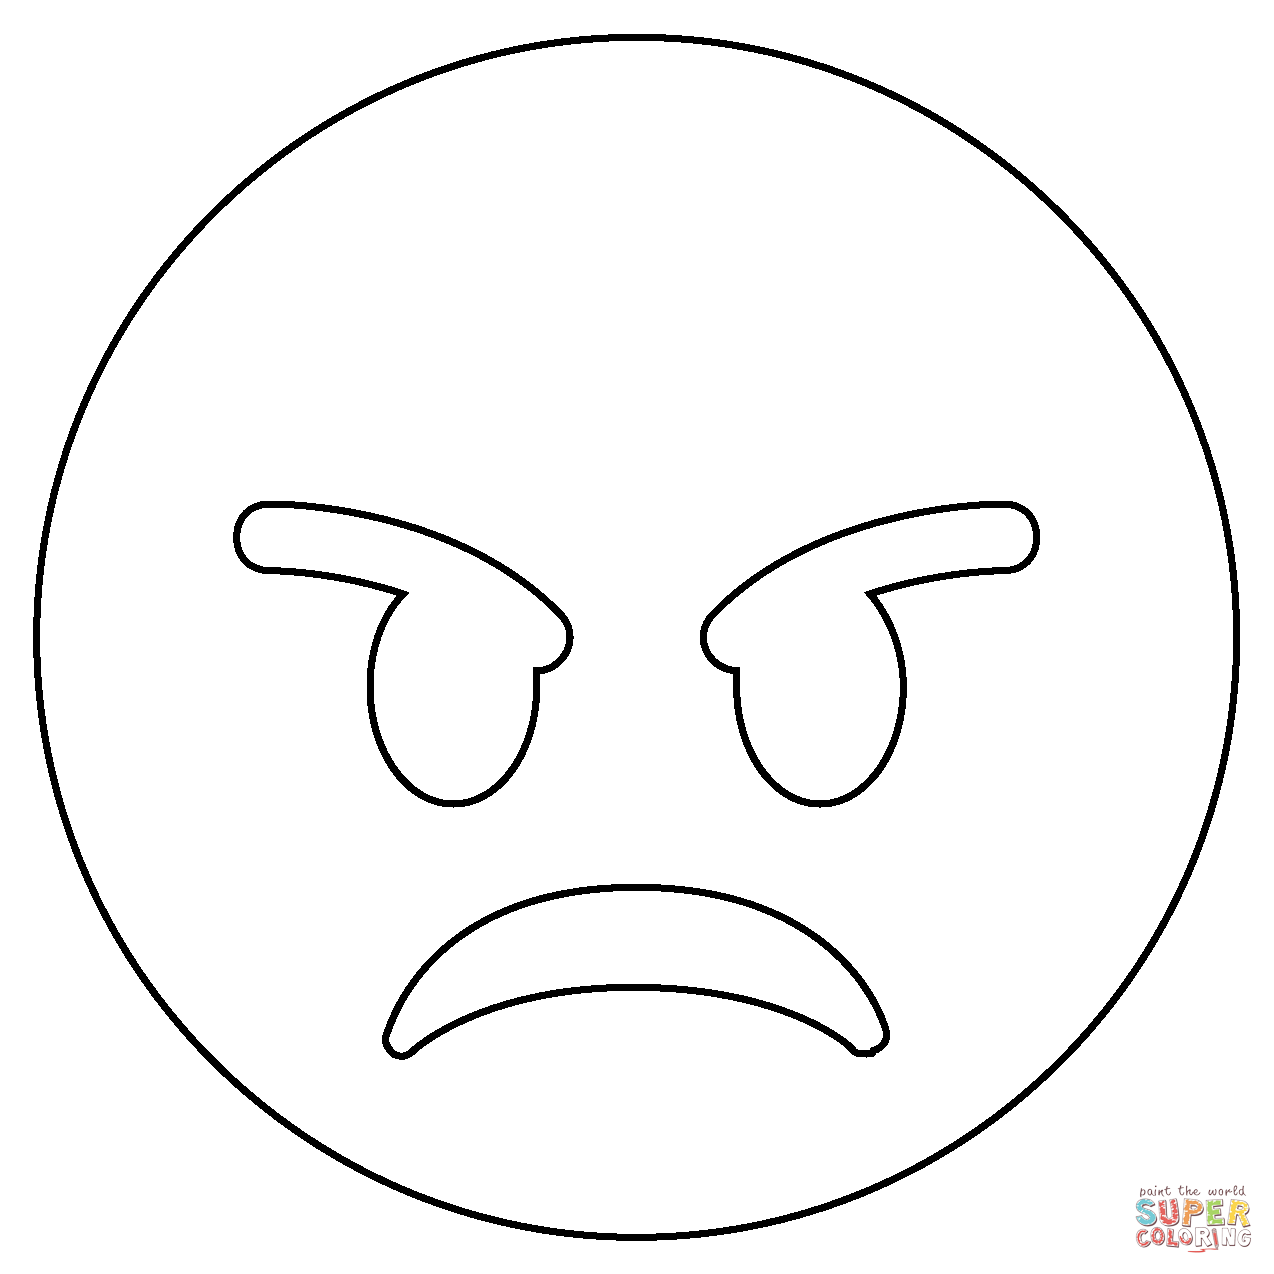 Angry face emoji coloring page free printable coloring pages